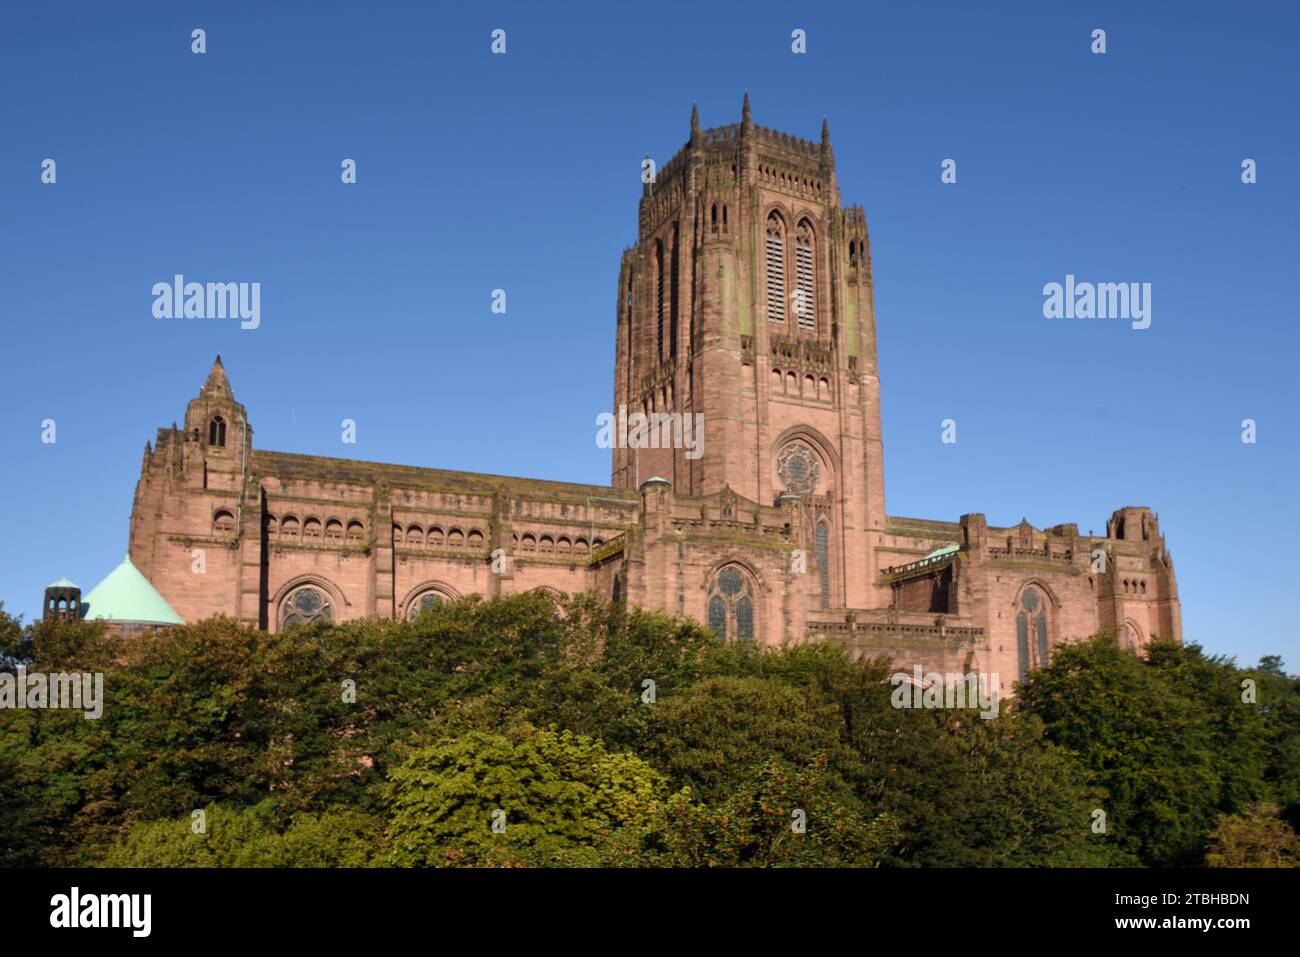 East Facade of Liverpool Anglican Cathedral (1904-1978), designed by Giles Gilbert Scott, on St. James Mount, Liverpool  England UK Stock Photo